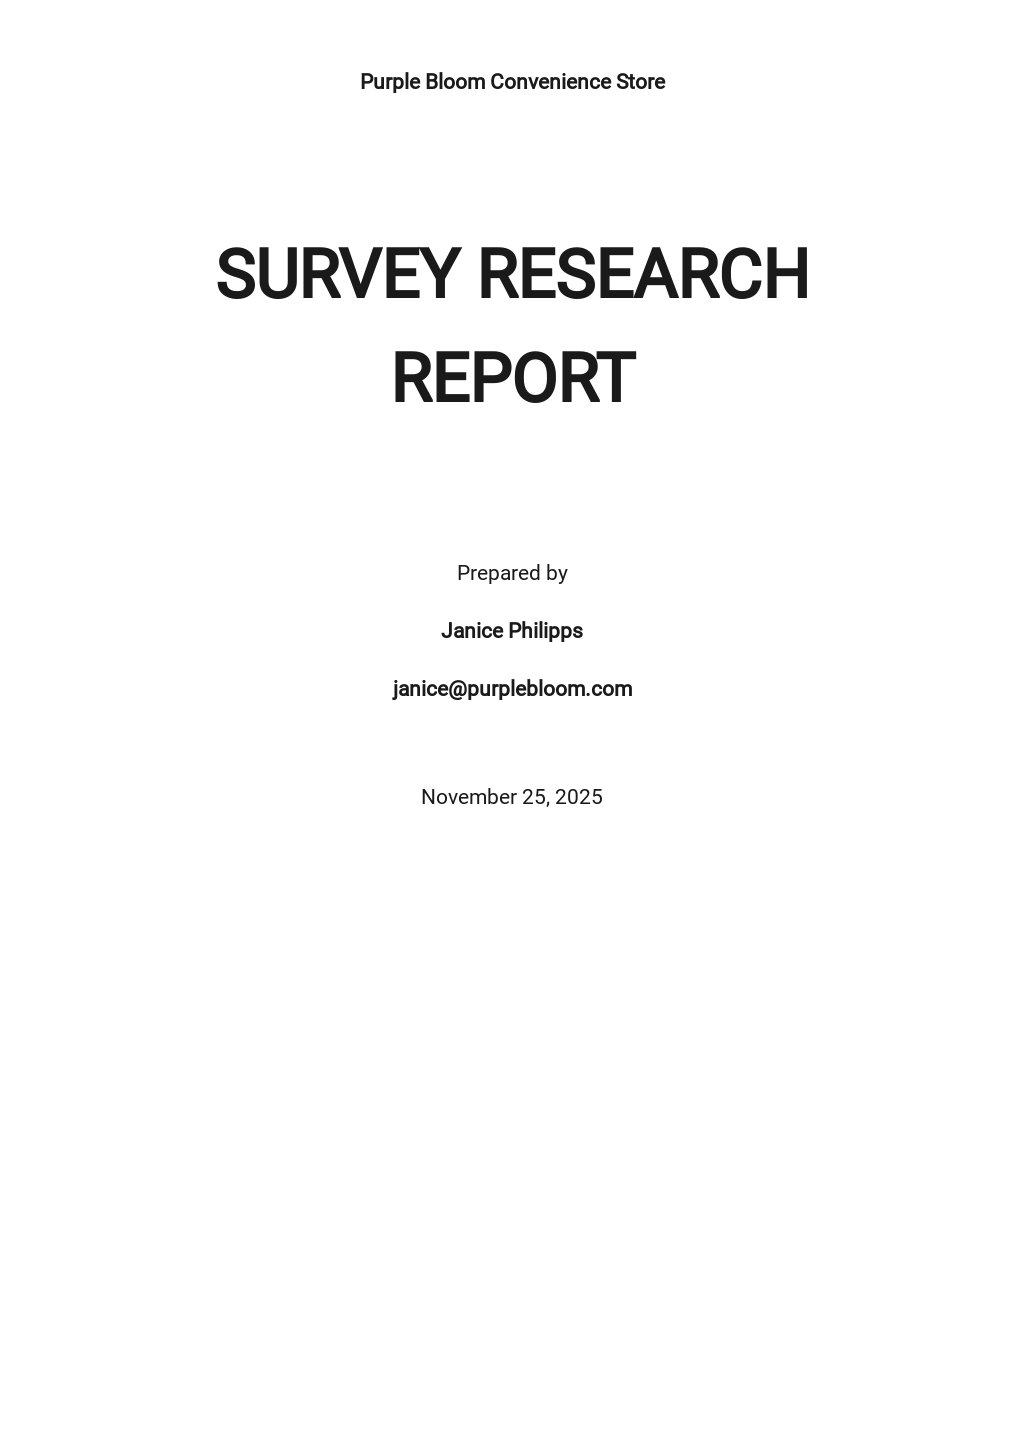 cover page of a research report